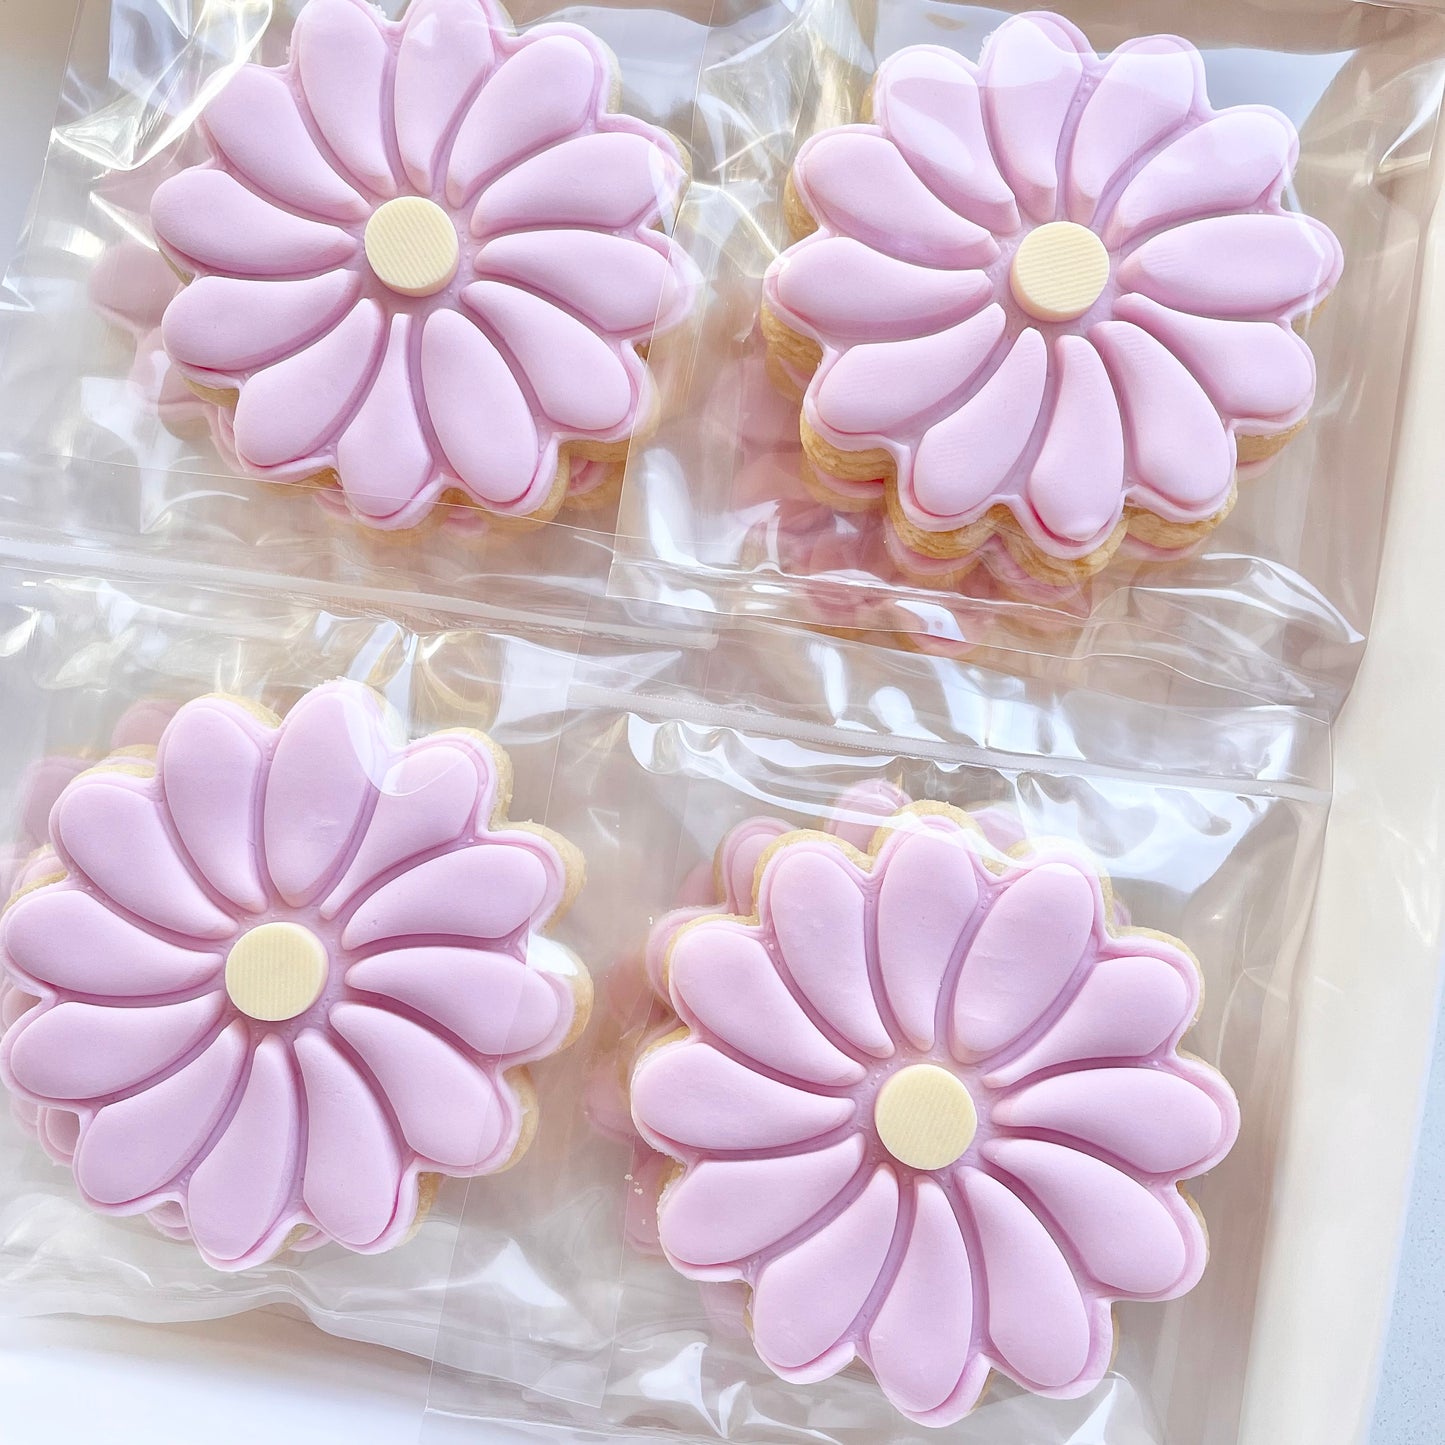 Daisy Cookies 12 Pack